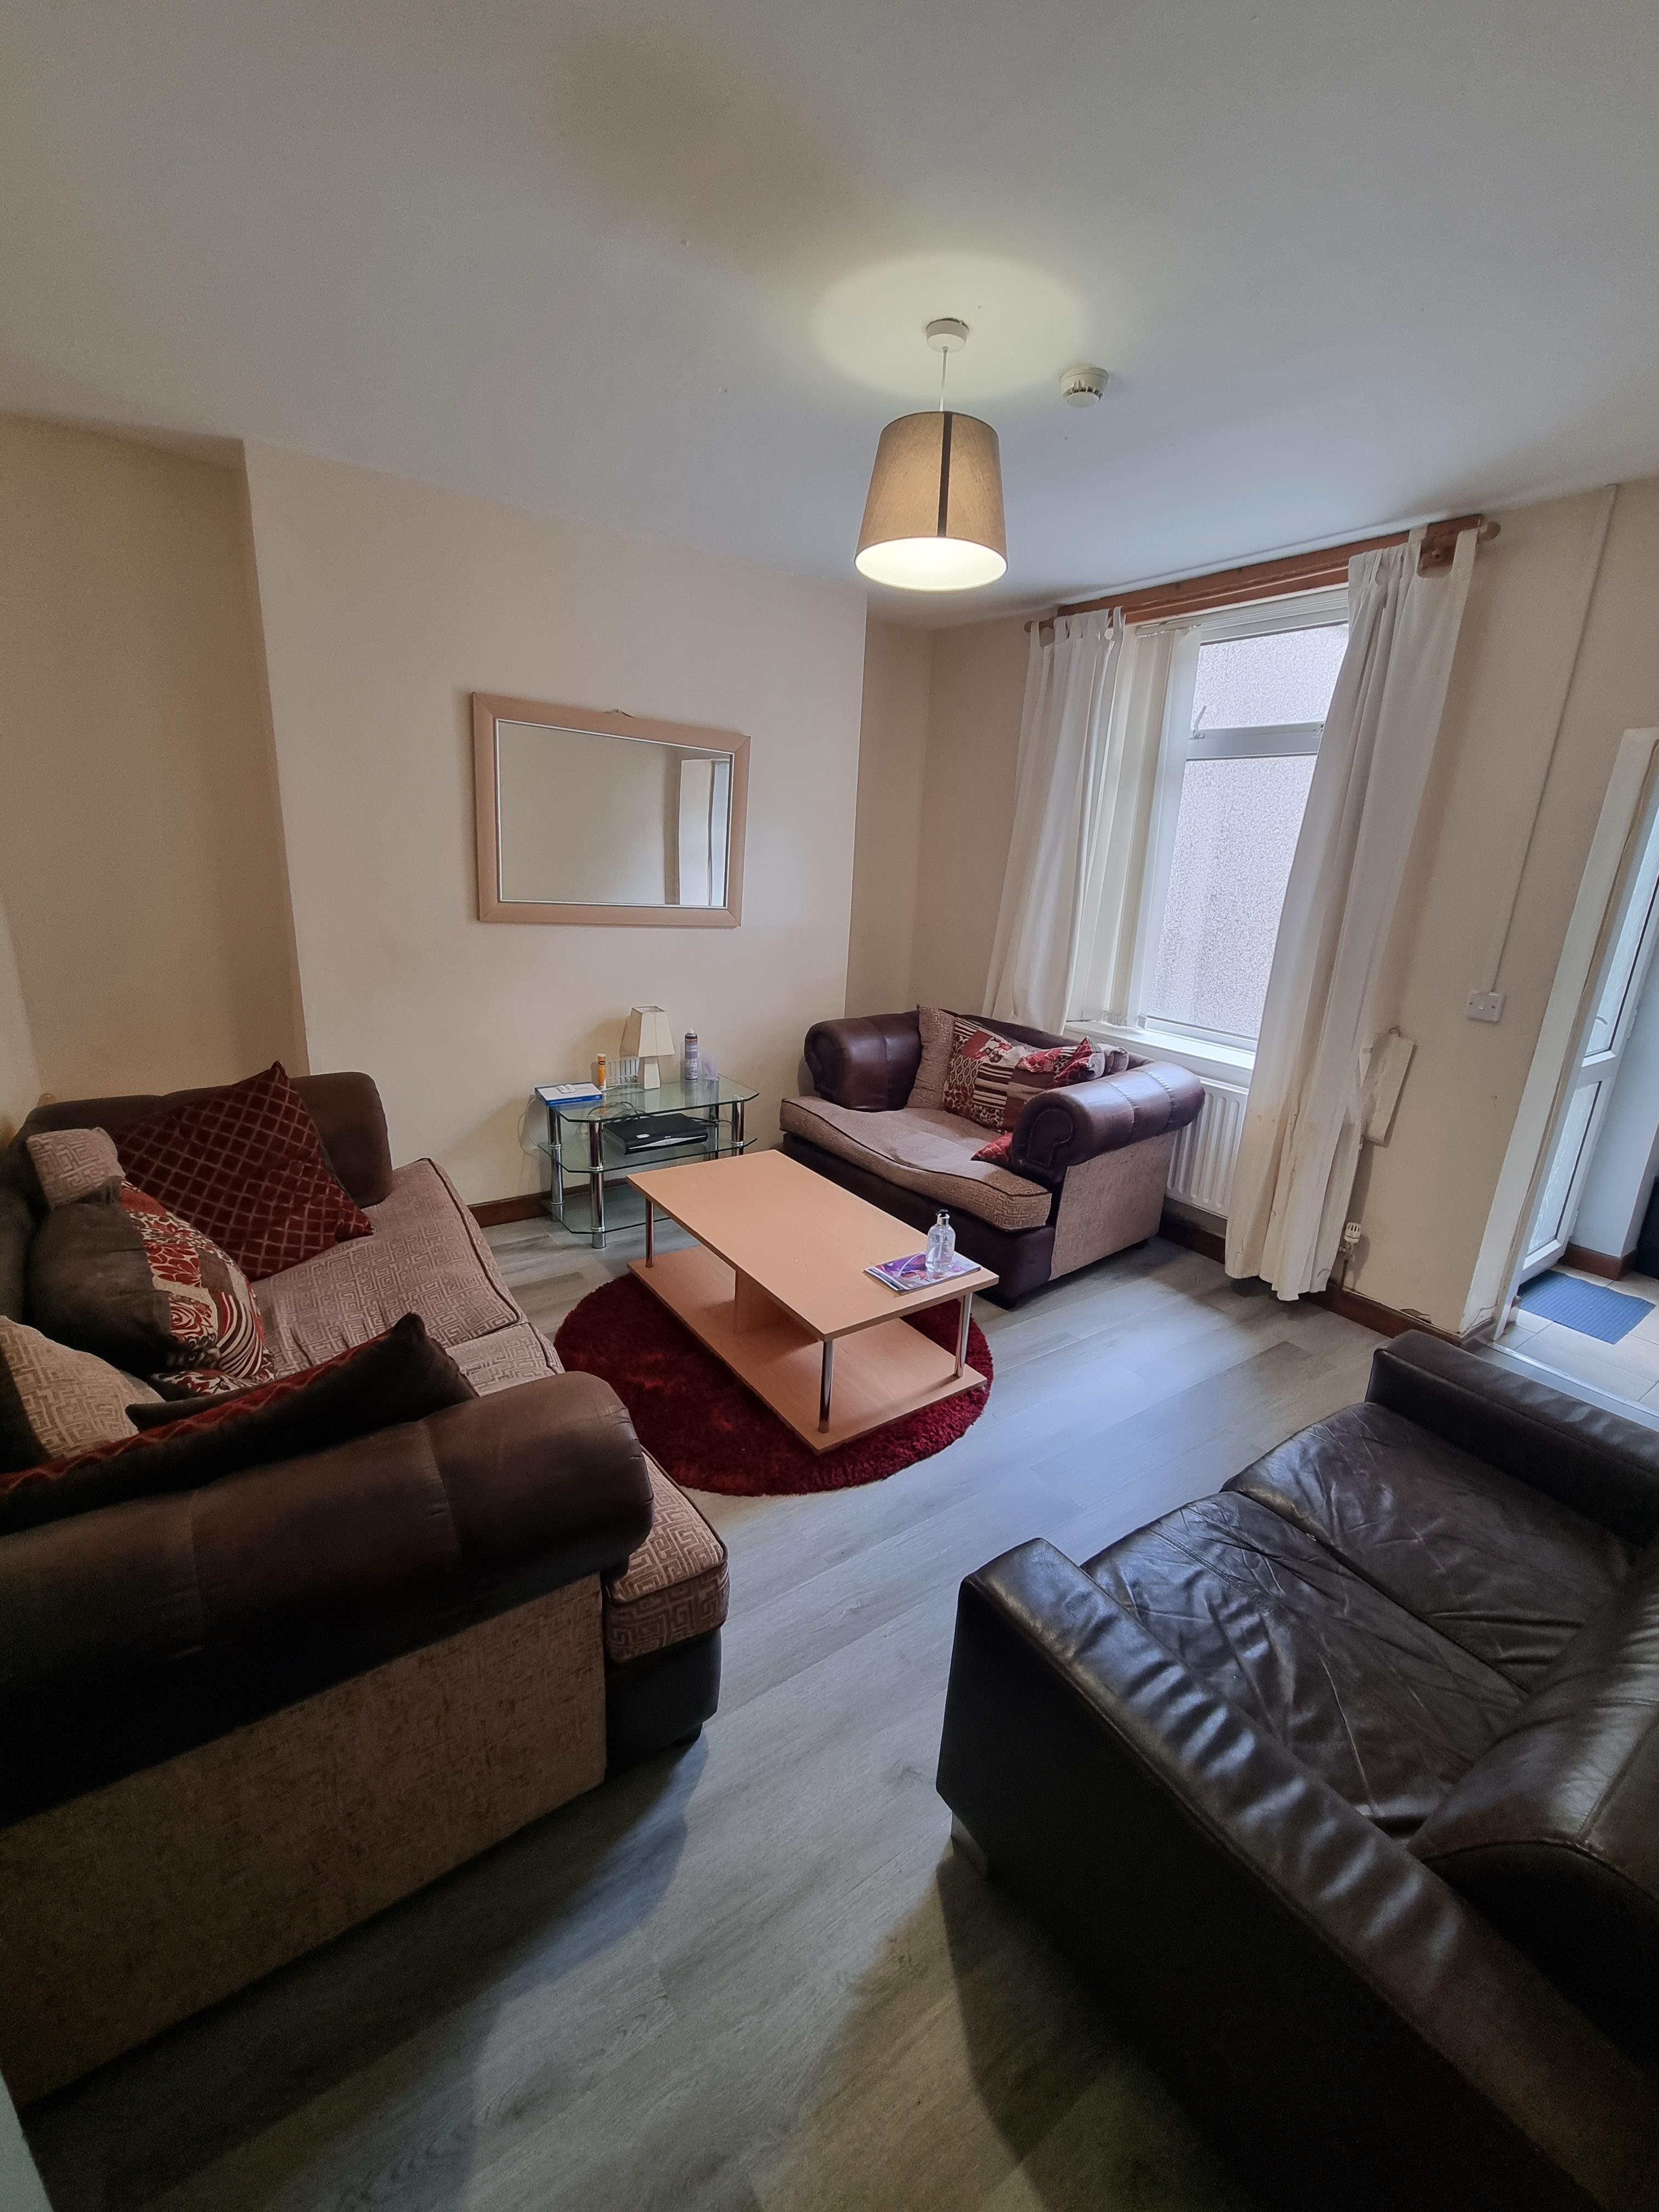 1 bed house / flat share to rent in Wood Road, Treforest  - Property Image 2